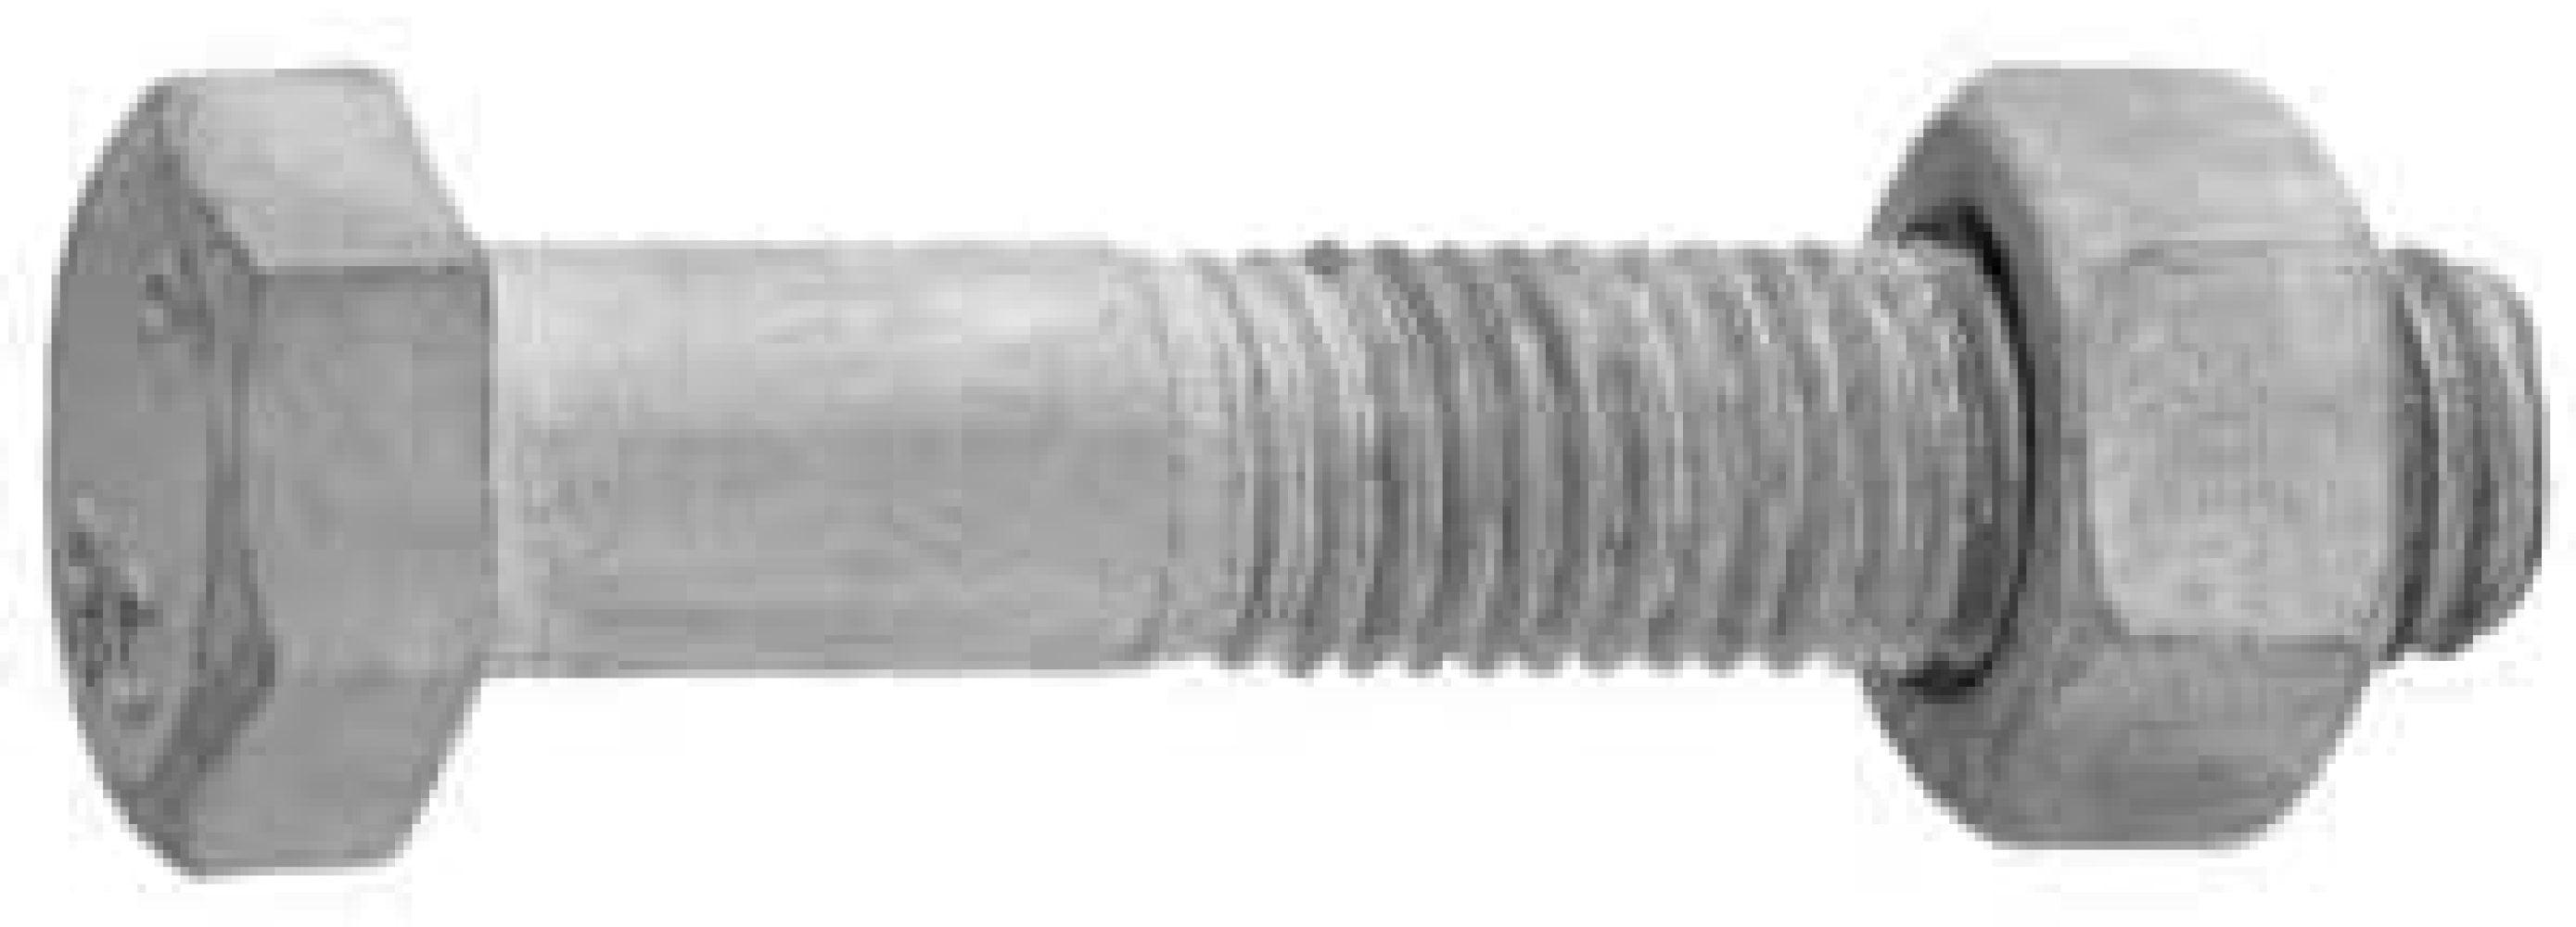 1/2-13 x 14" Carriage Bolts and Nuts Hot Dip Galvanized Quantity 25 